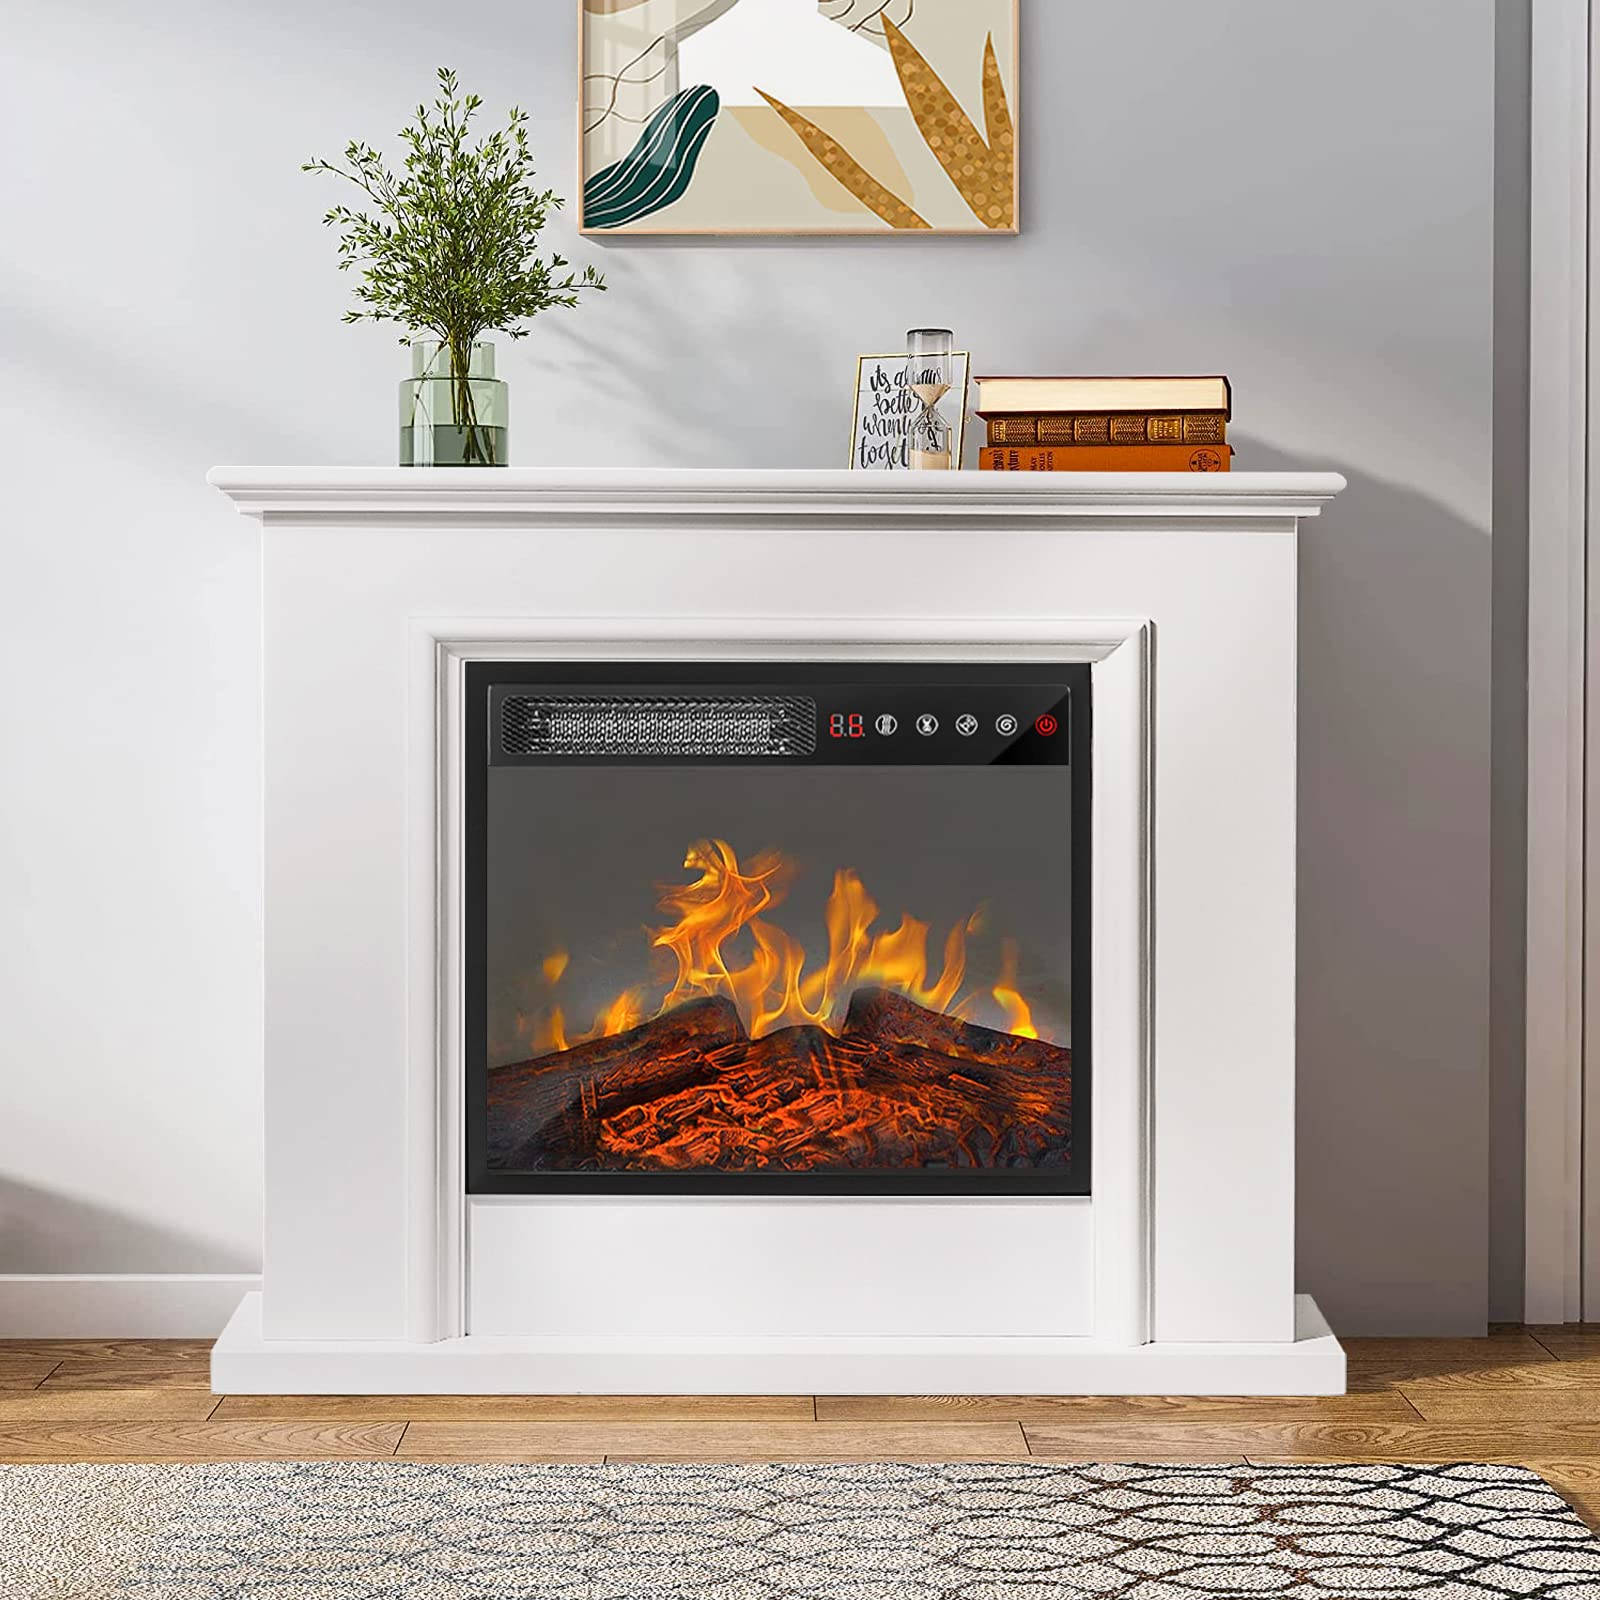 7 Best Electric Fireplace Mantels to Add Luxury to Your Home 7130